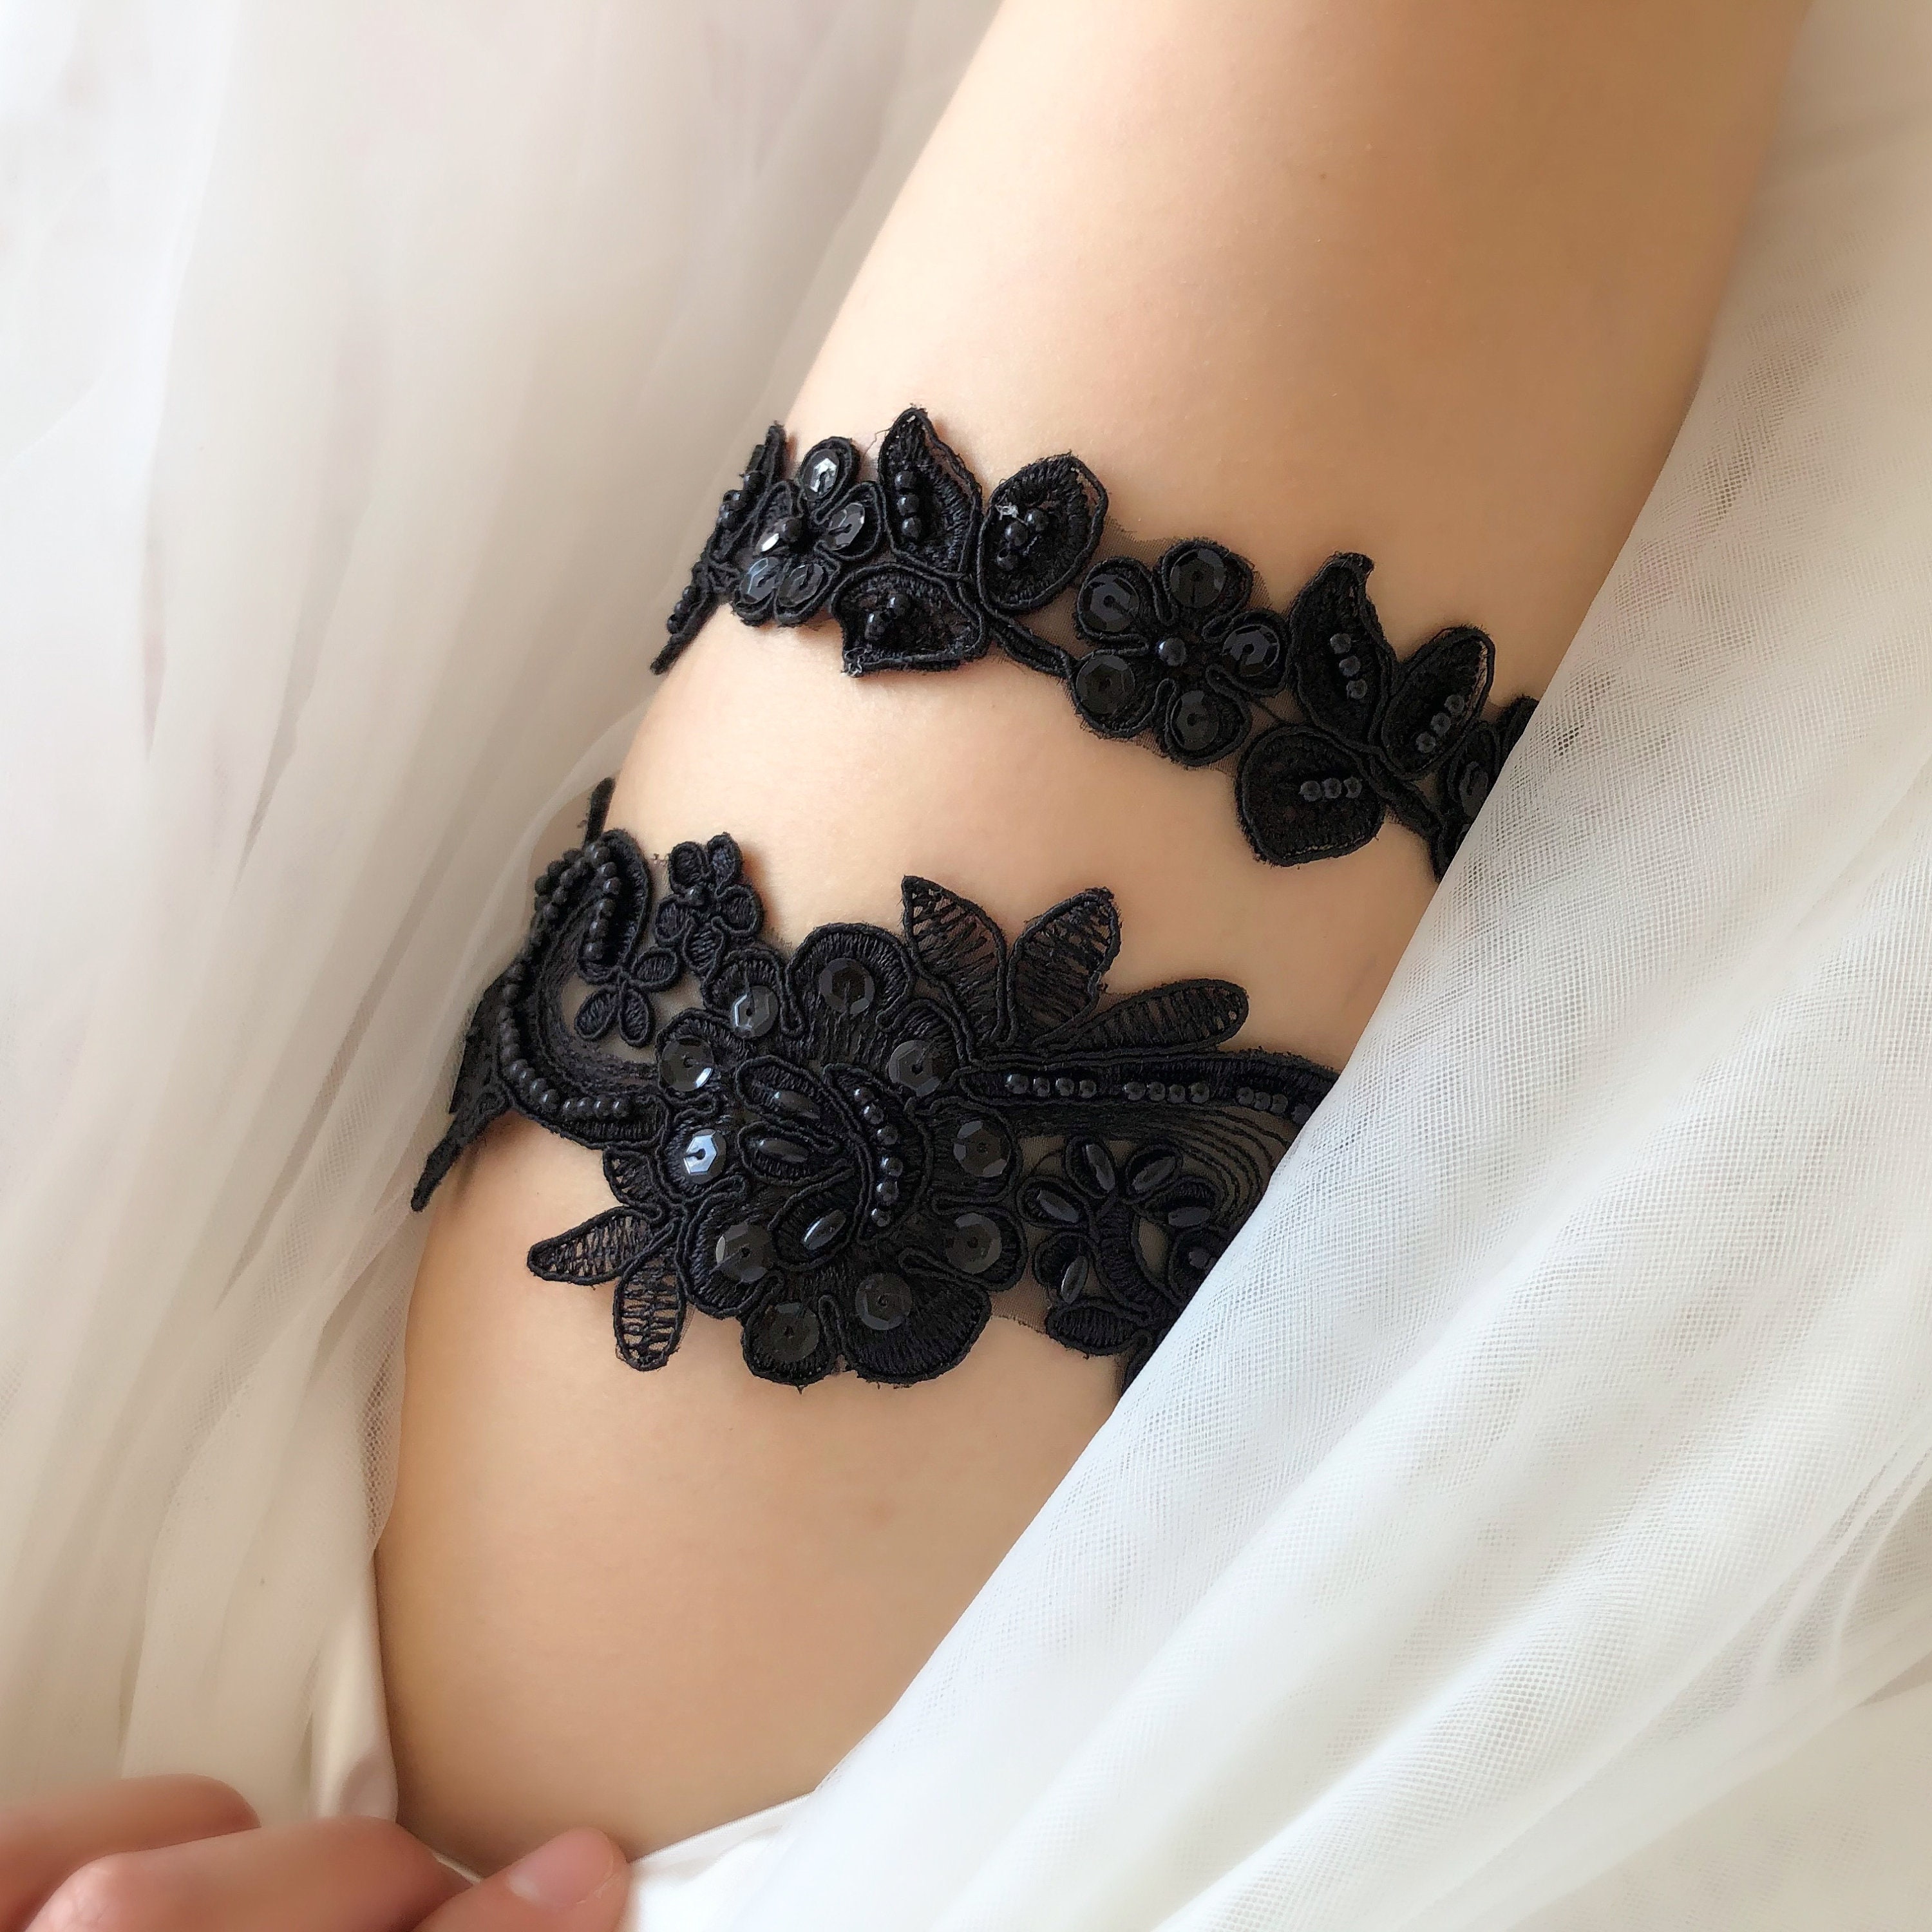 20 Matching Leg Garter Sets to Wear Instead of Stockings This Summer